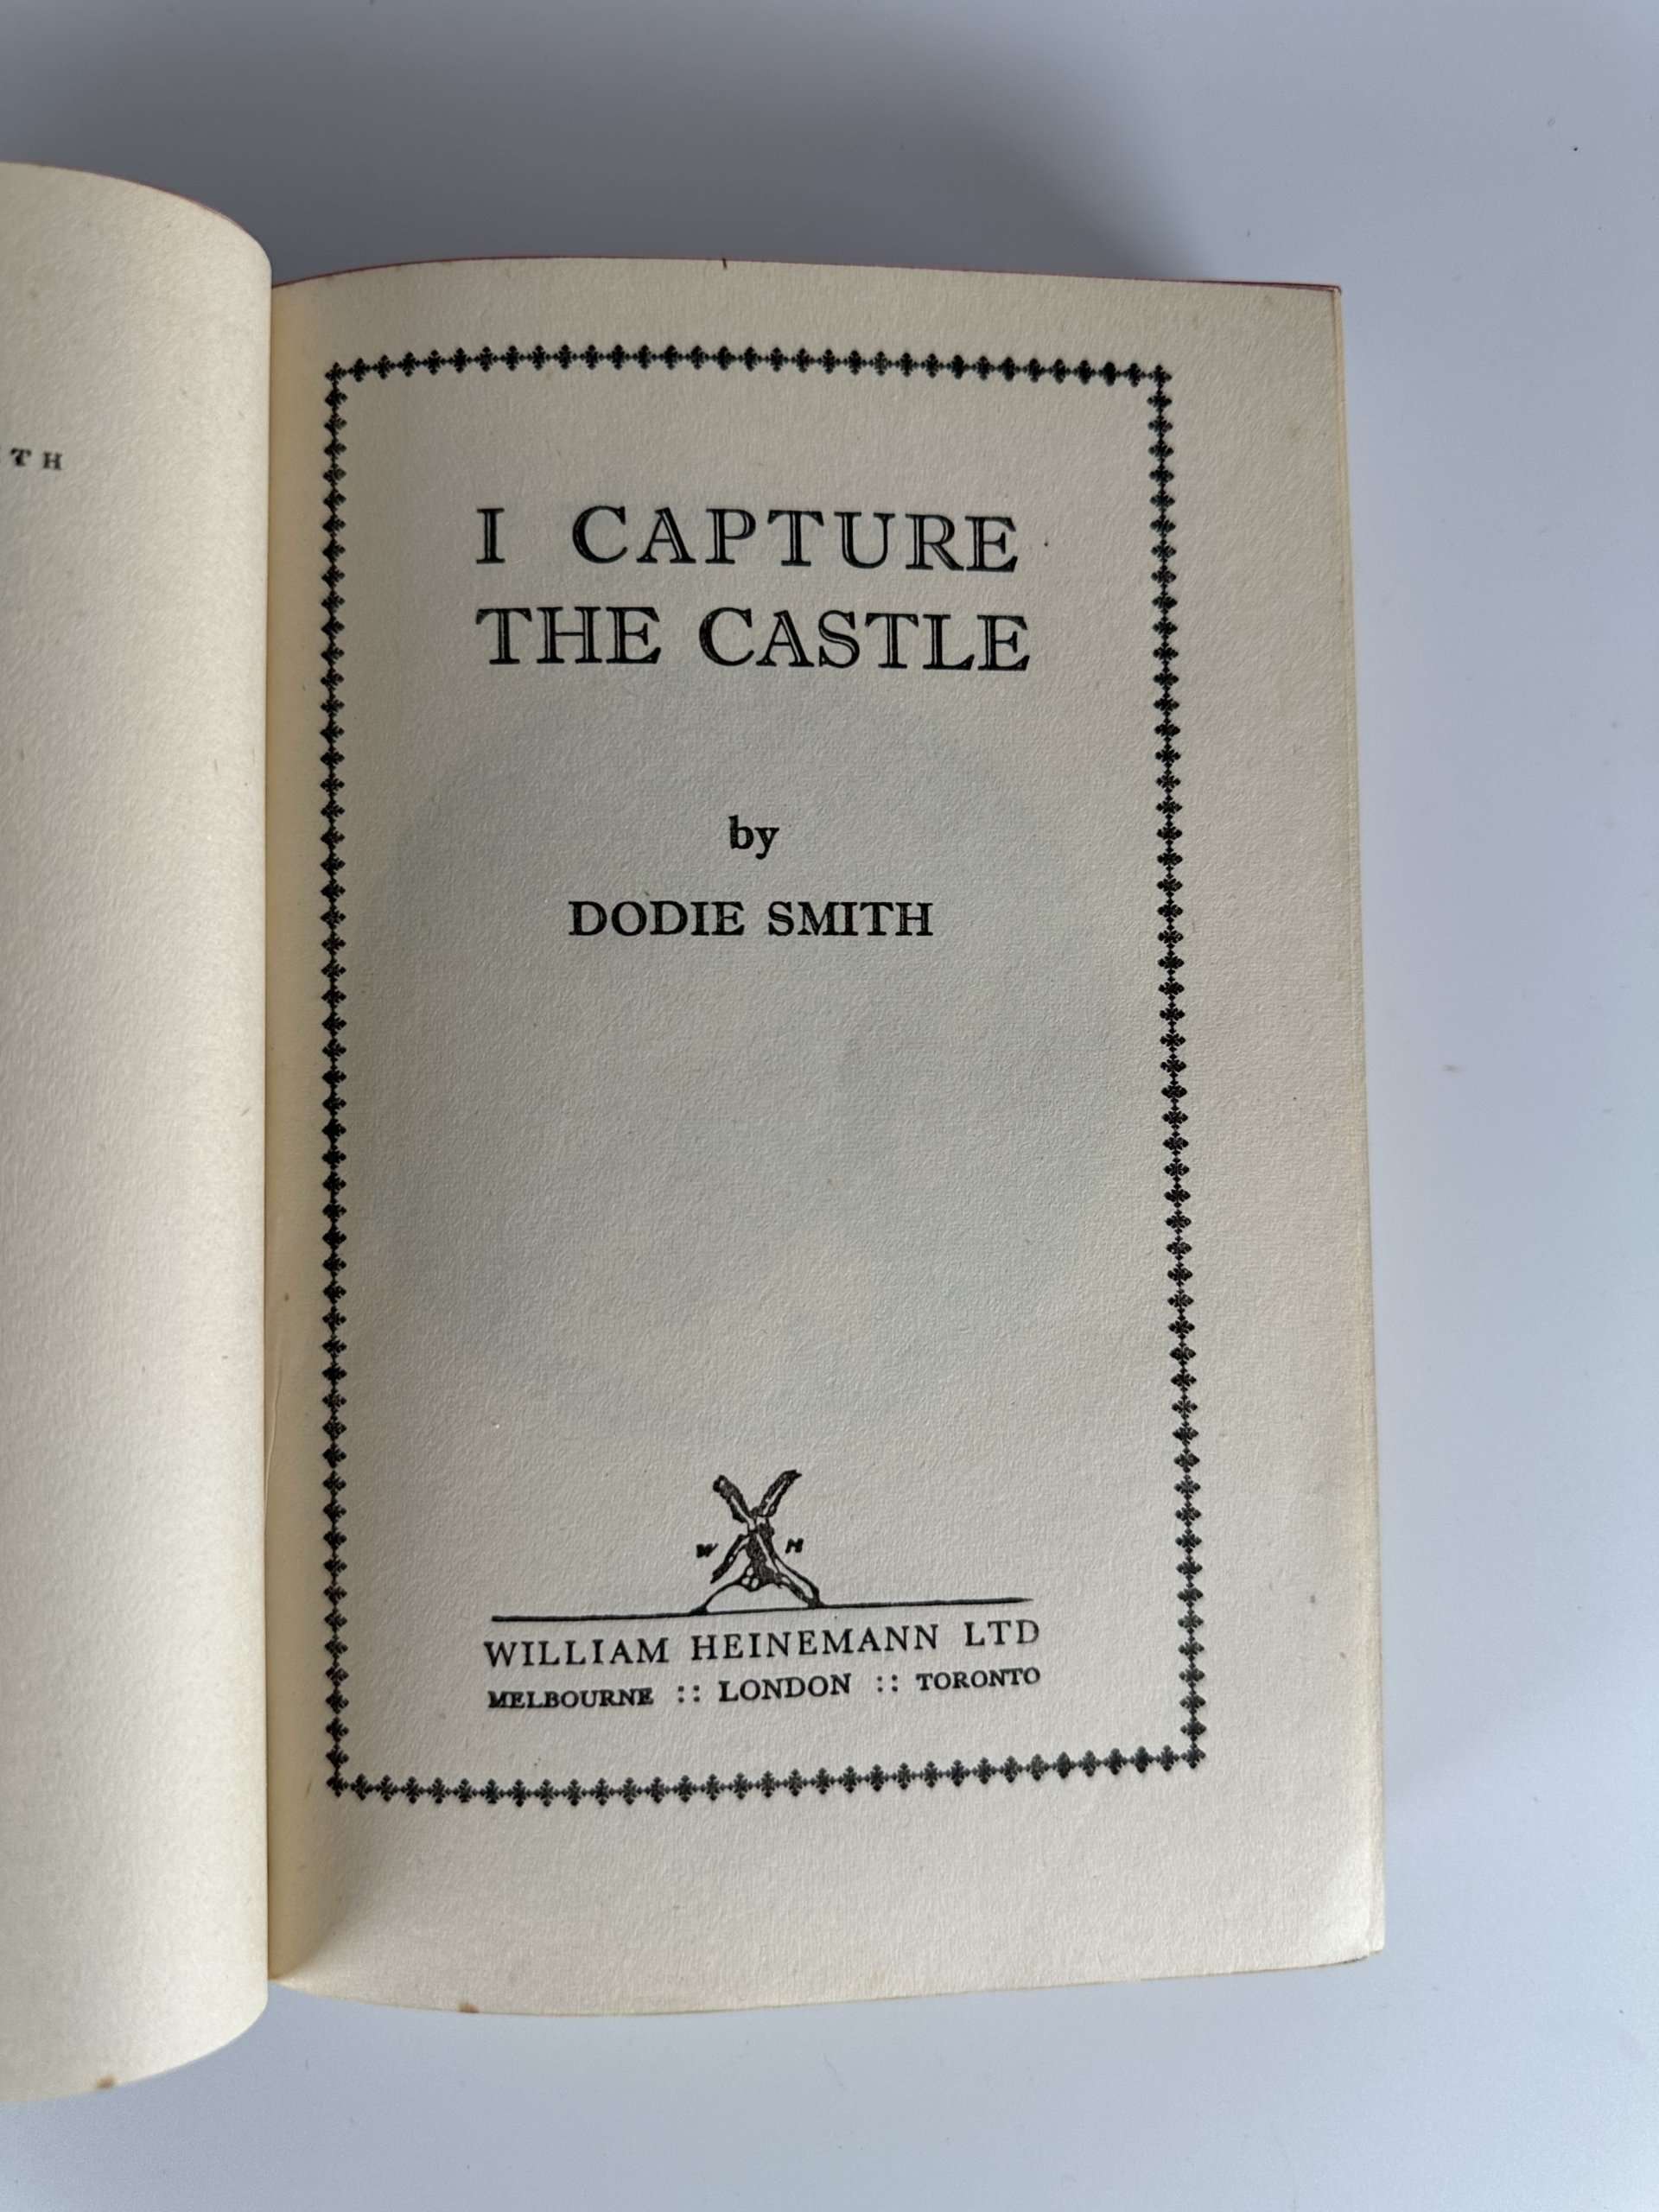 dodie smith I capture the castle first edition3